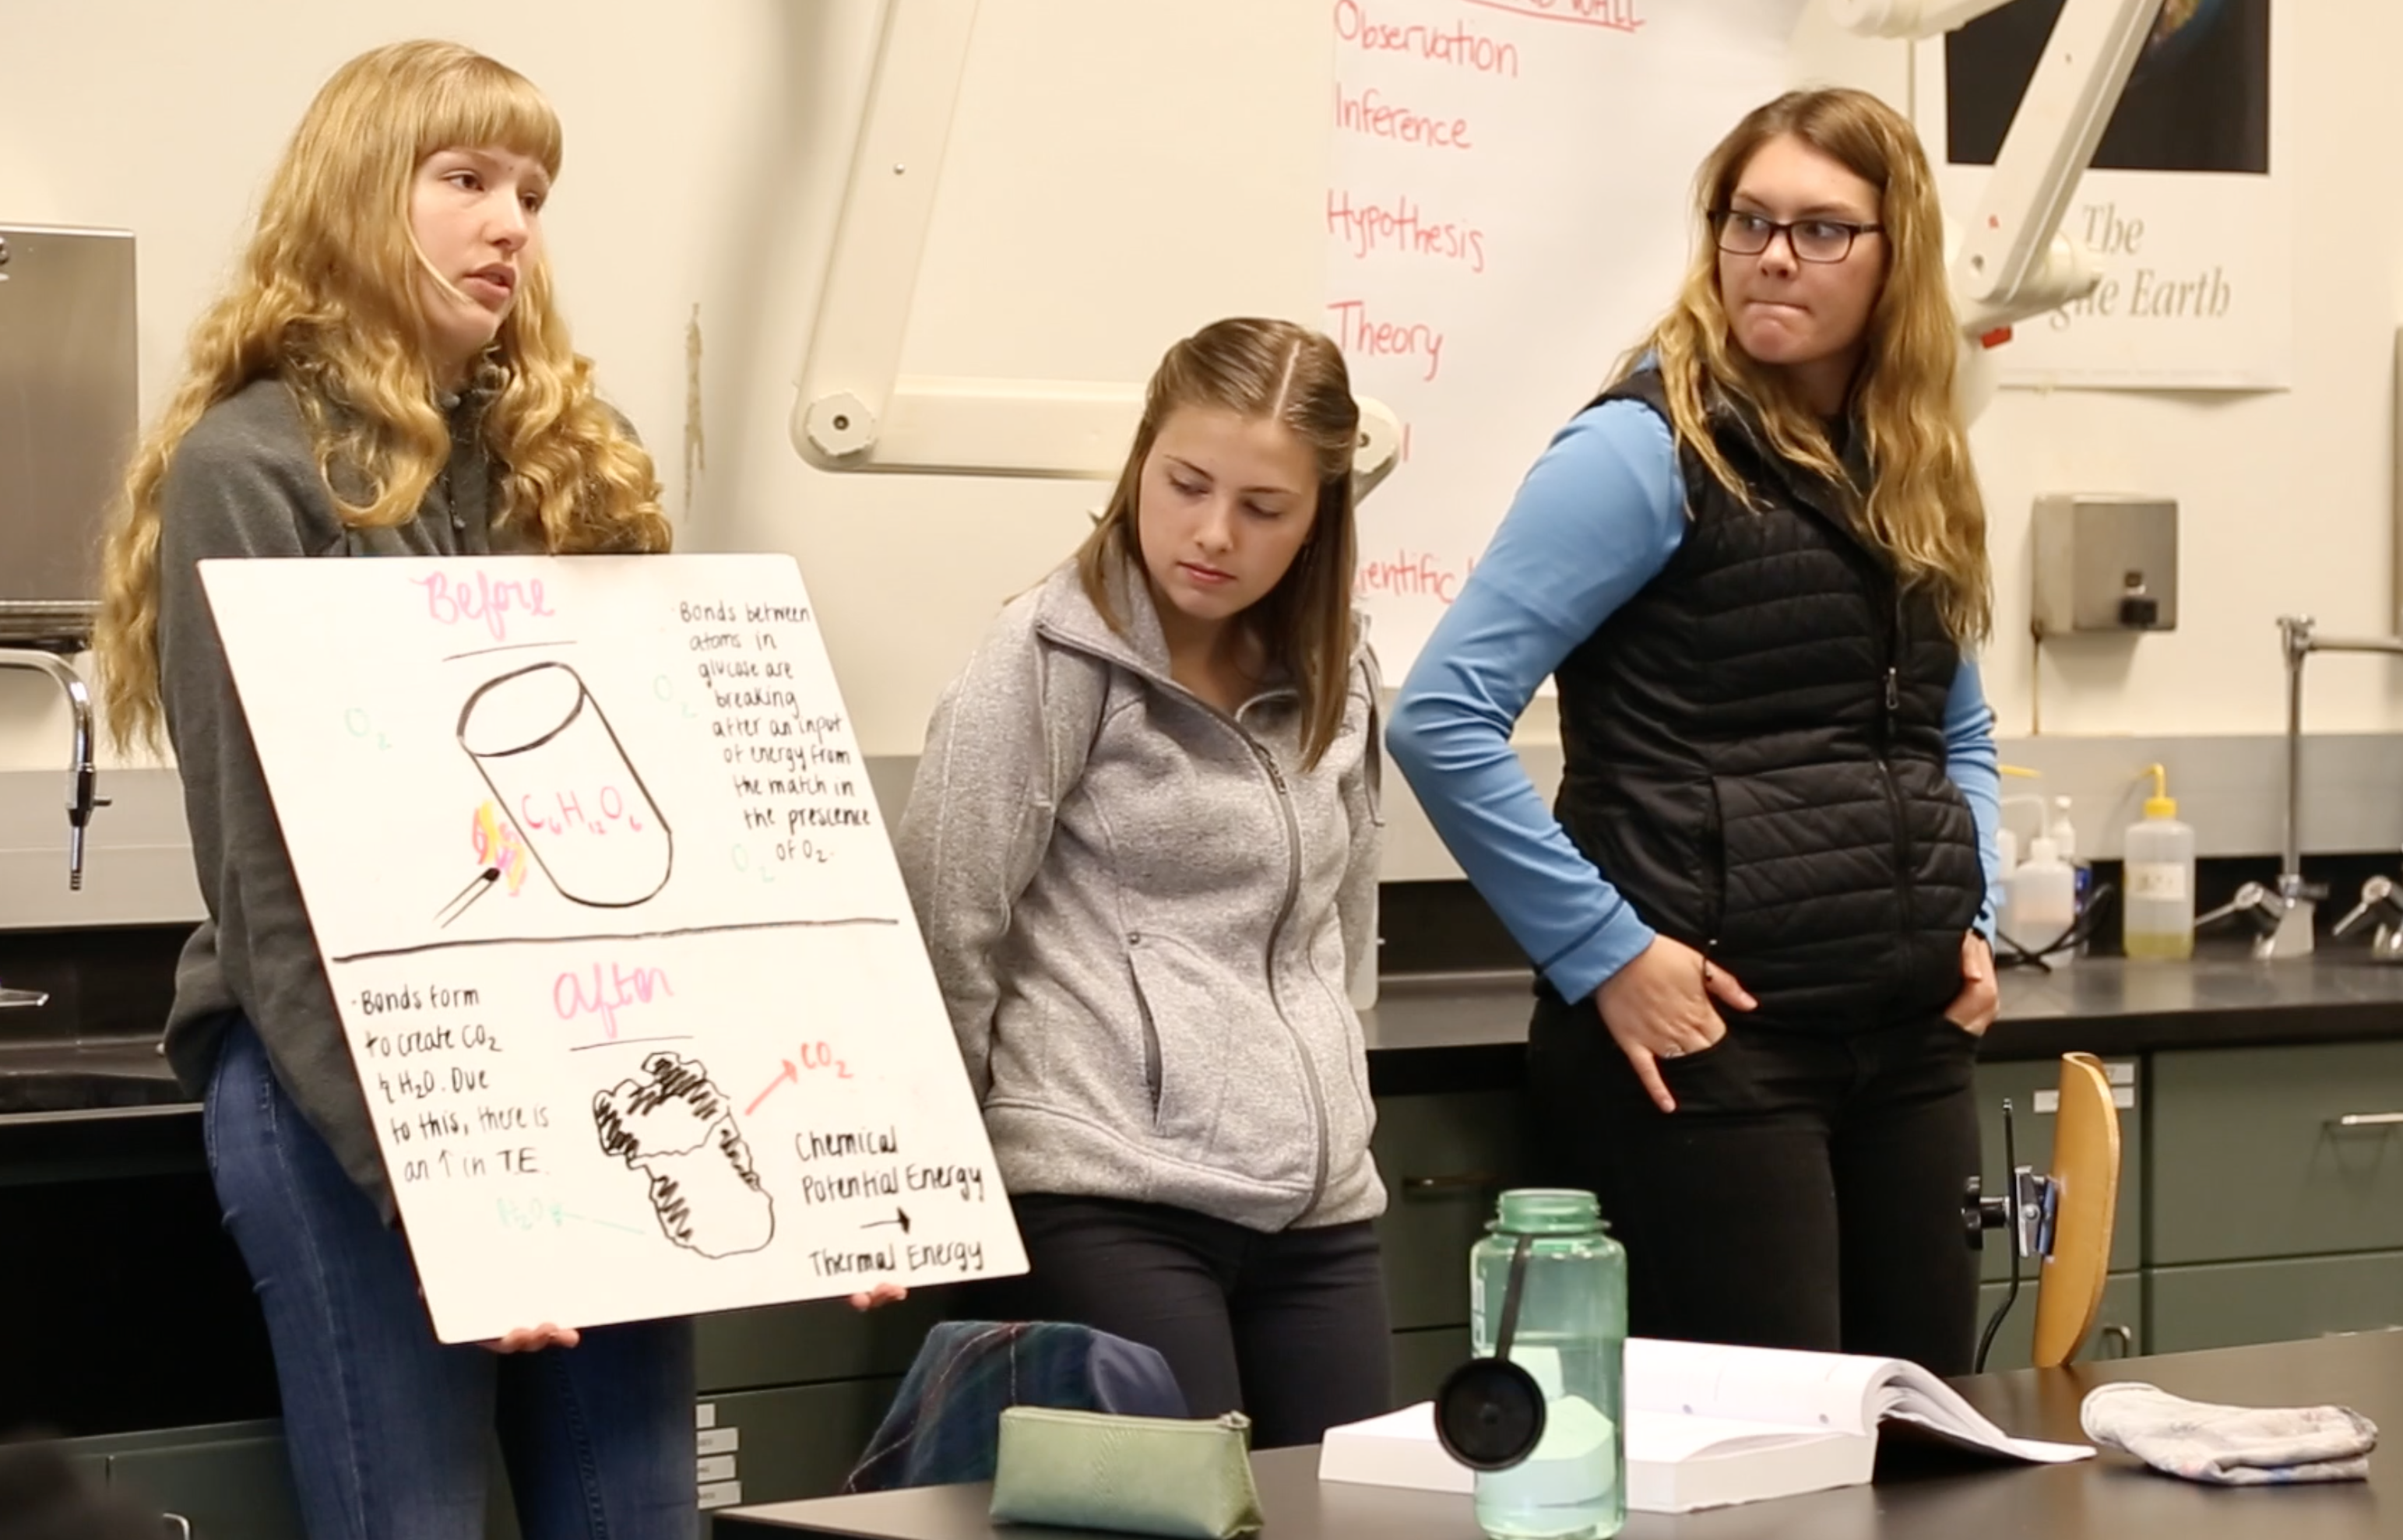 A group of students presenting their work on a whiteboard at the front of the class